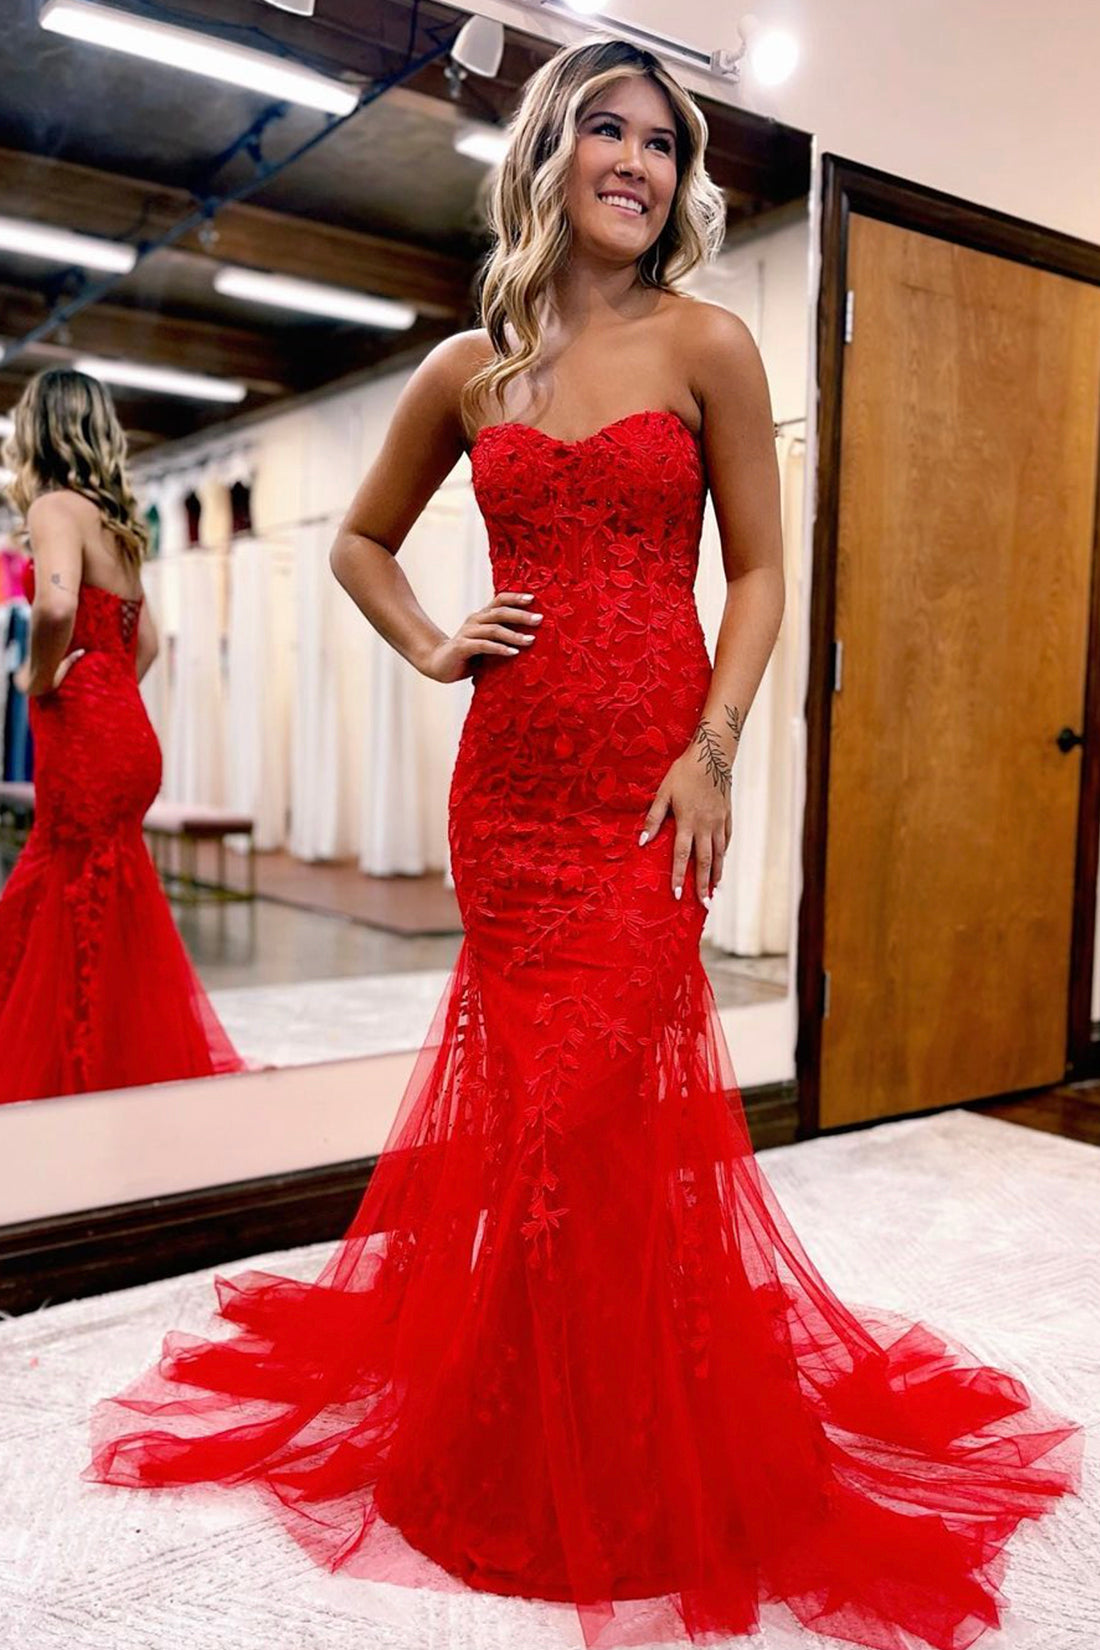 Red Lace Prom Dress